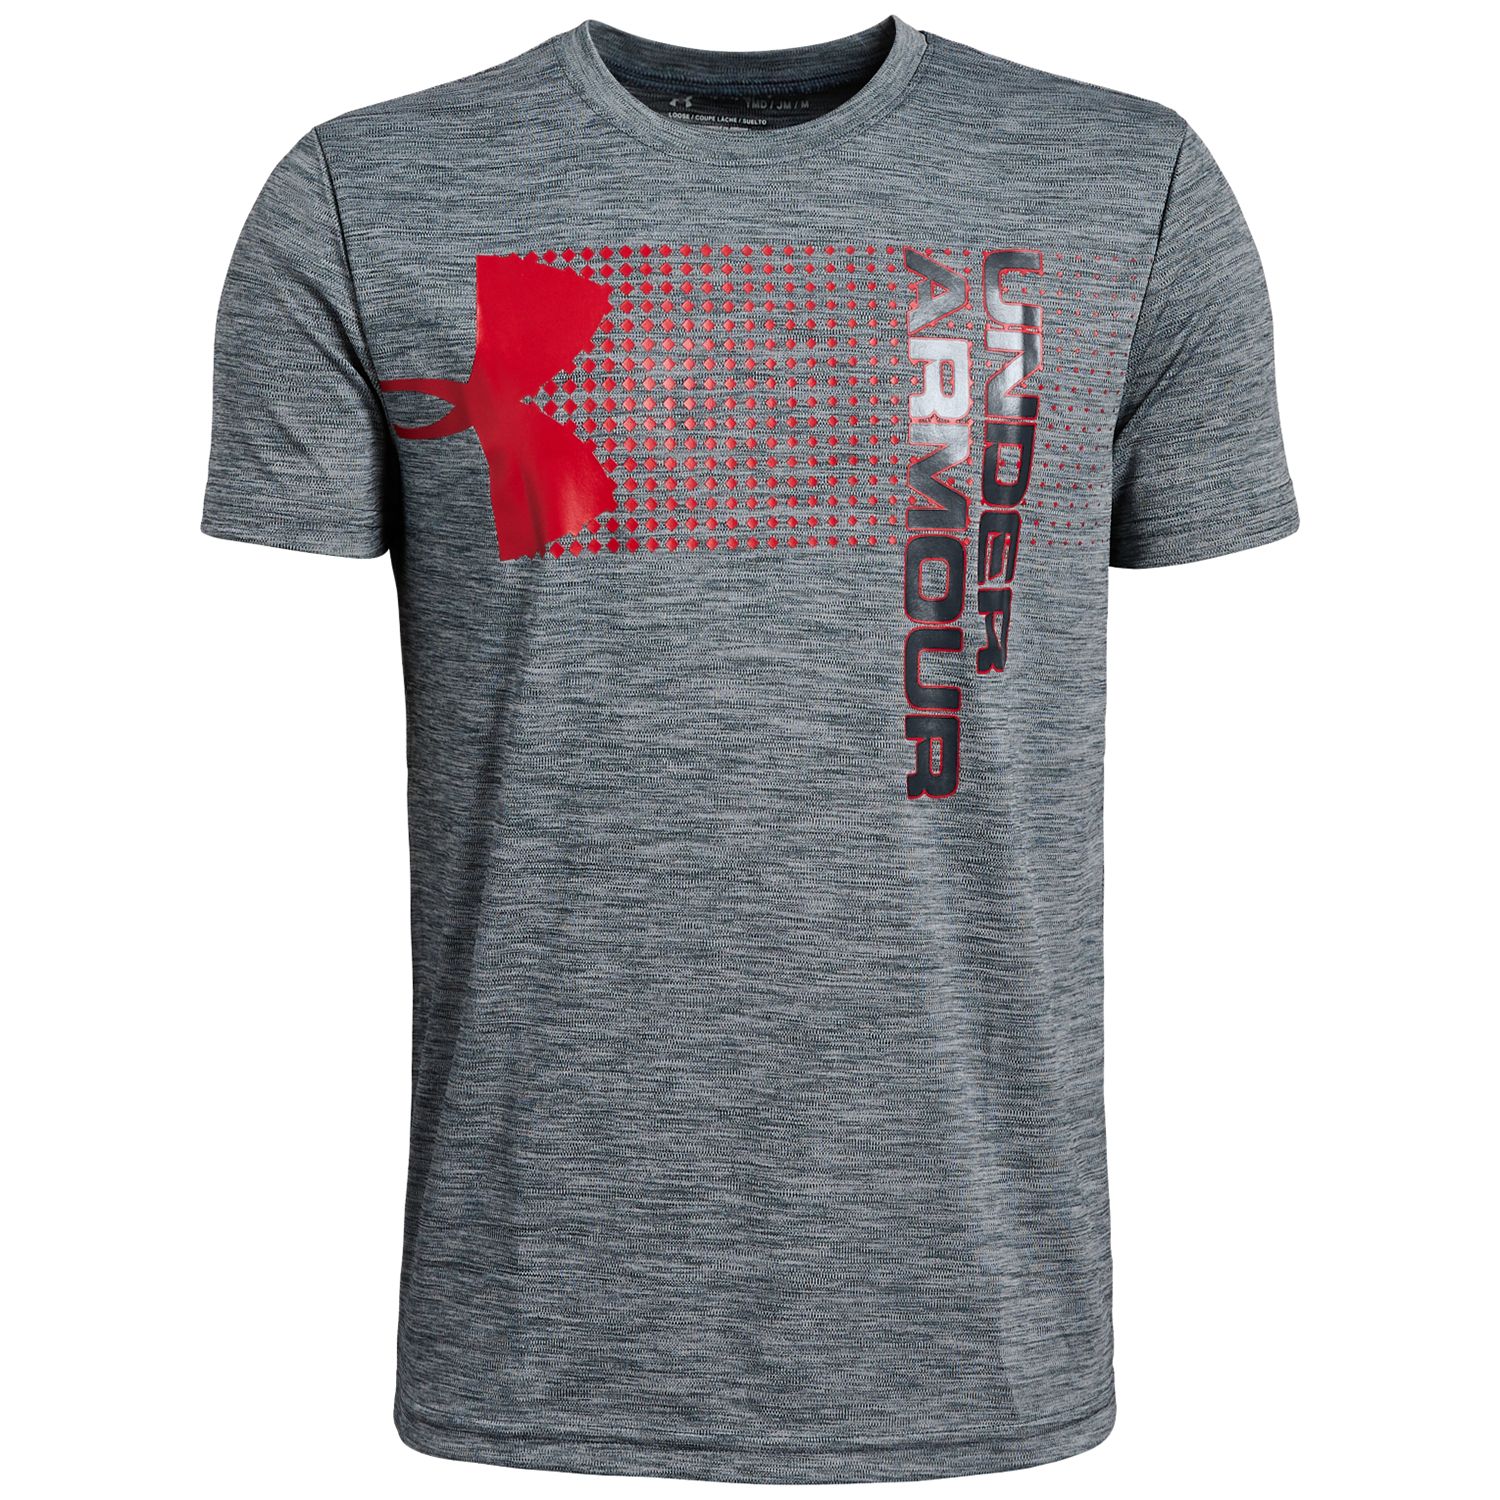 kohl's under armour t shirts